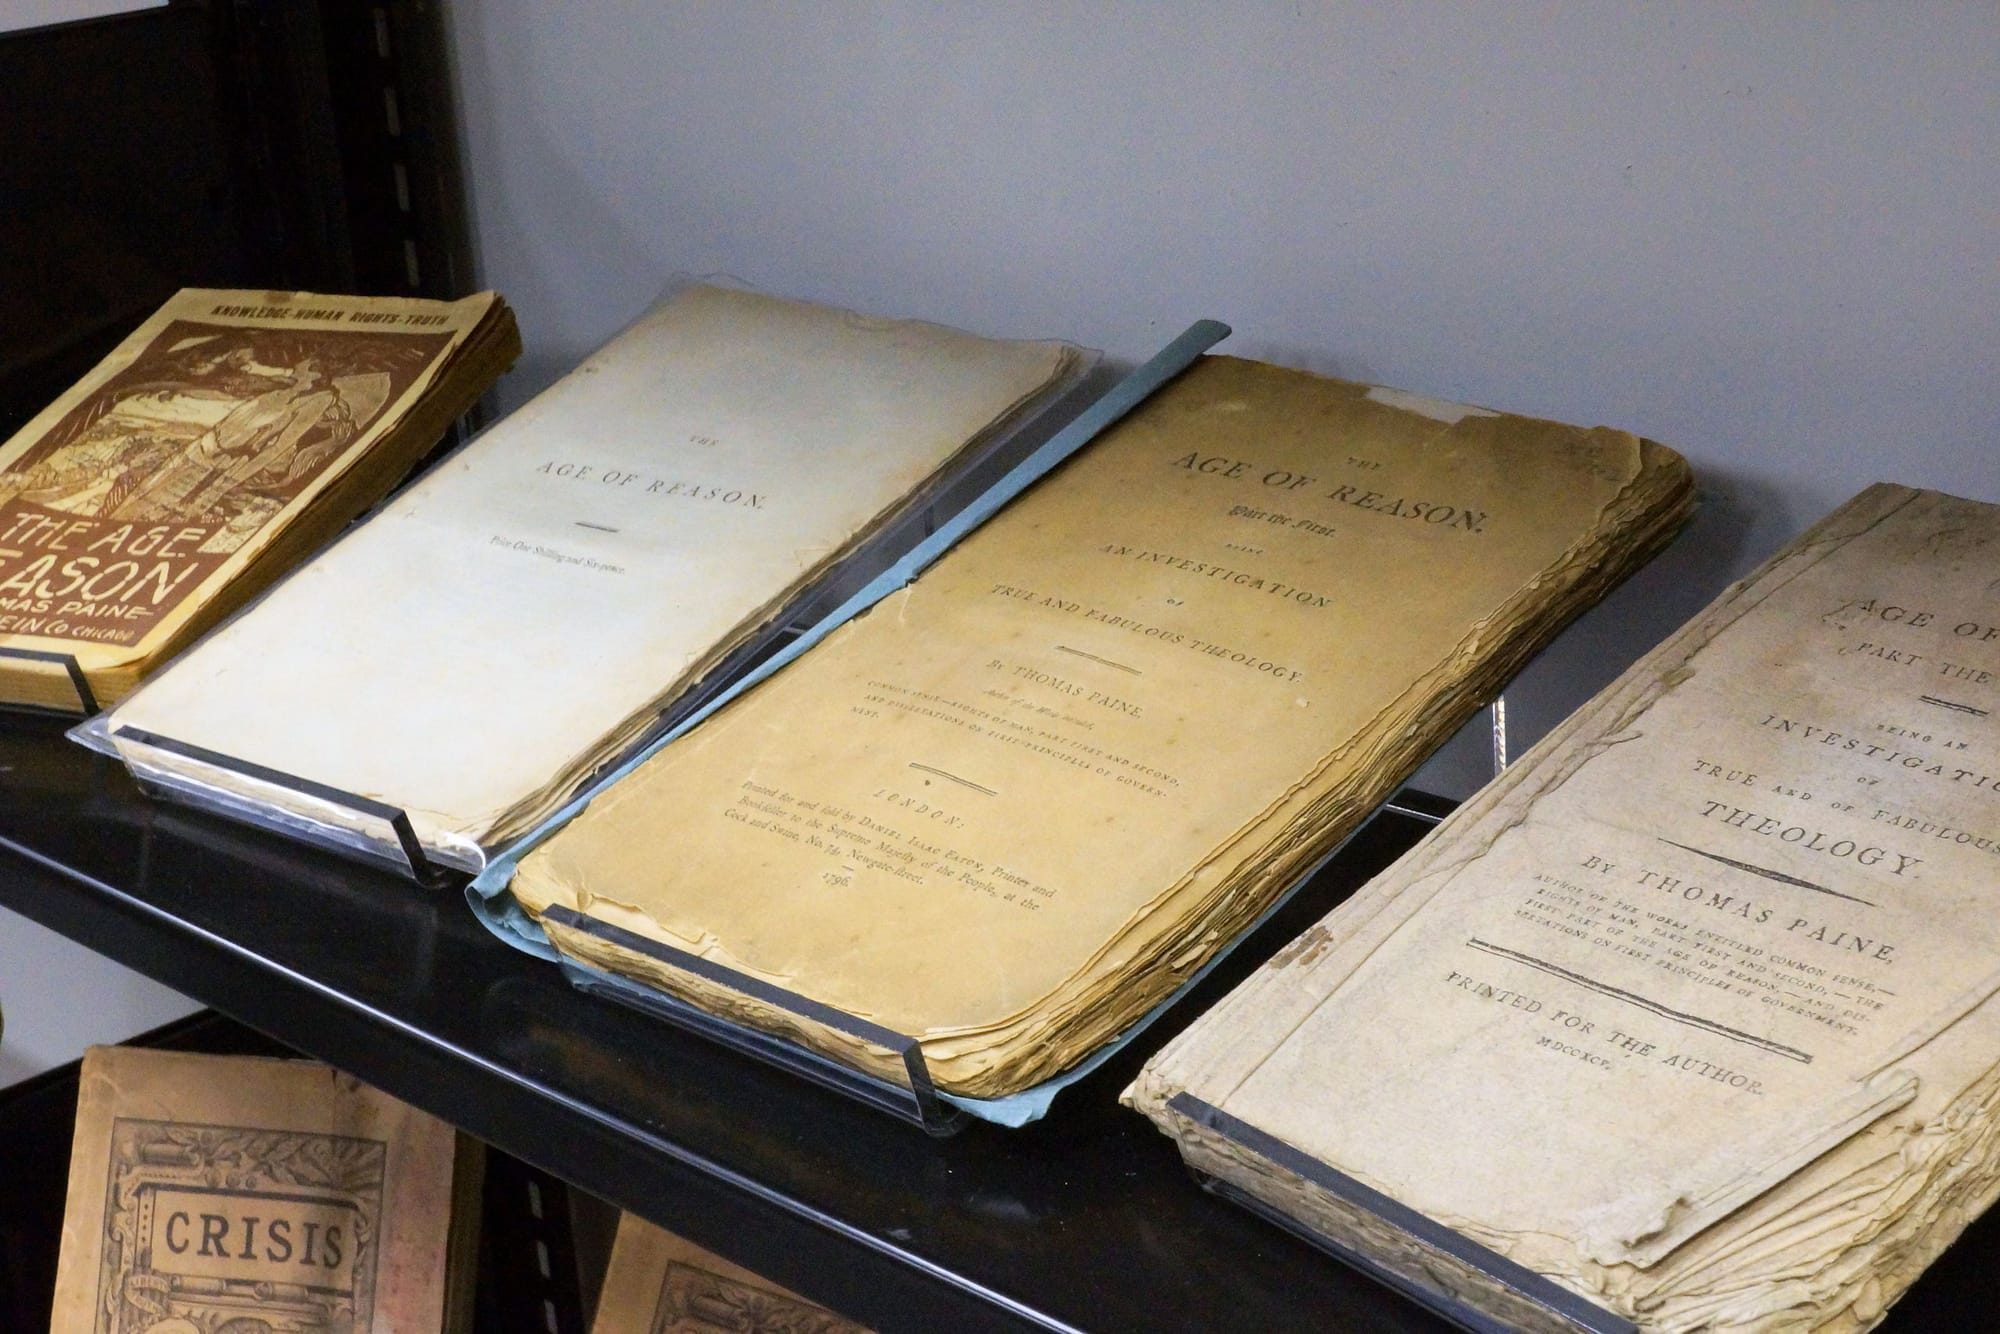 Rare editions of Thomas Paine's THE AGE OF REASON in archival boxes, the pages tattered with age. 